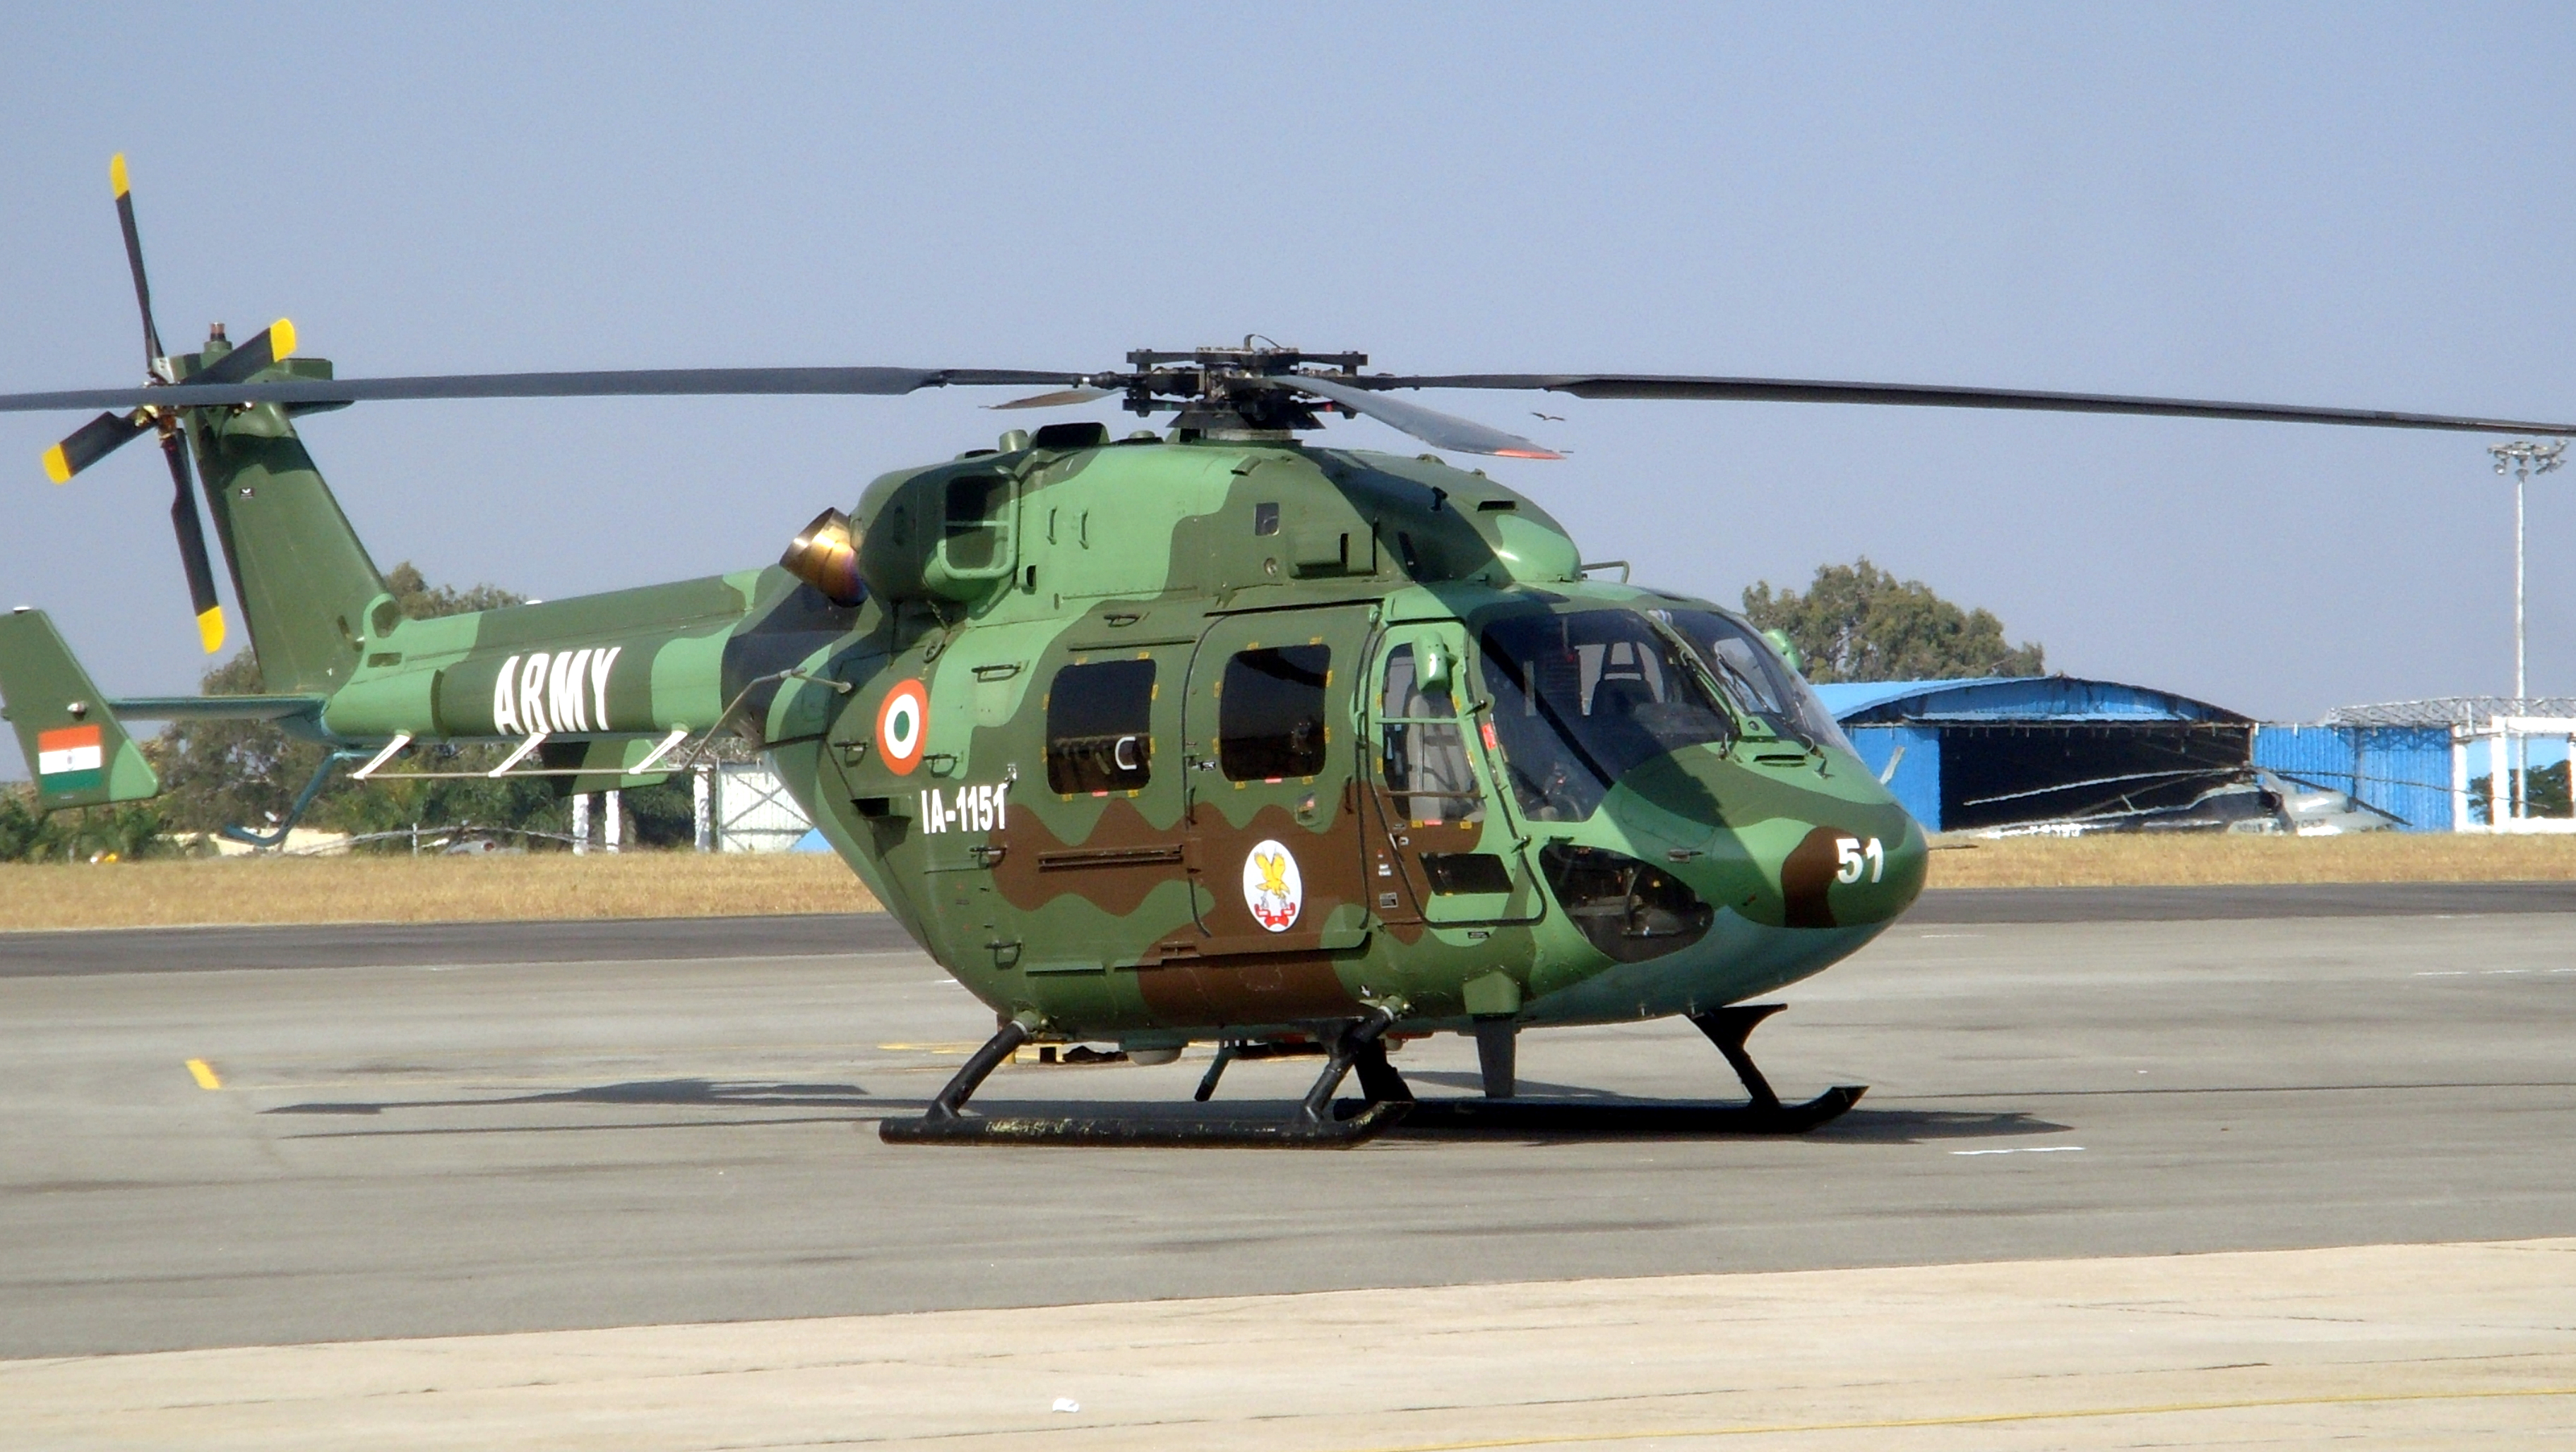 Army Helicopter Pictures File:Indian Army Dhruv Helicopter at Aero India 2013.JPG - Wikimedia .